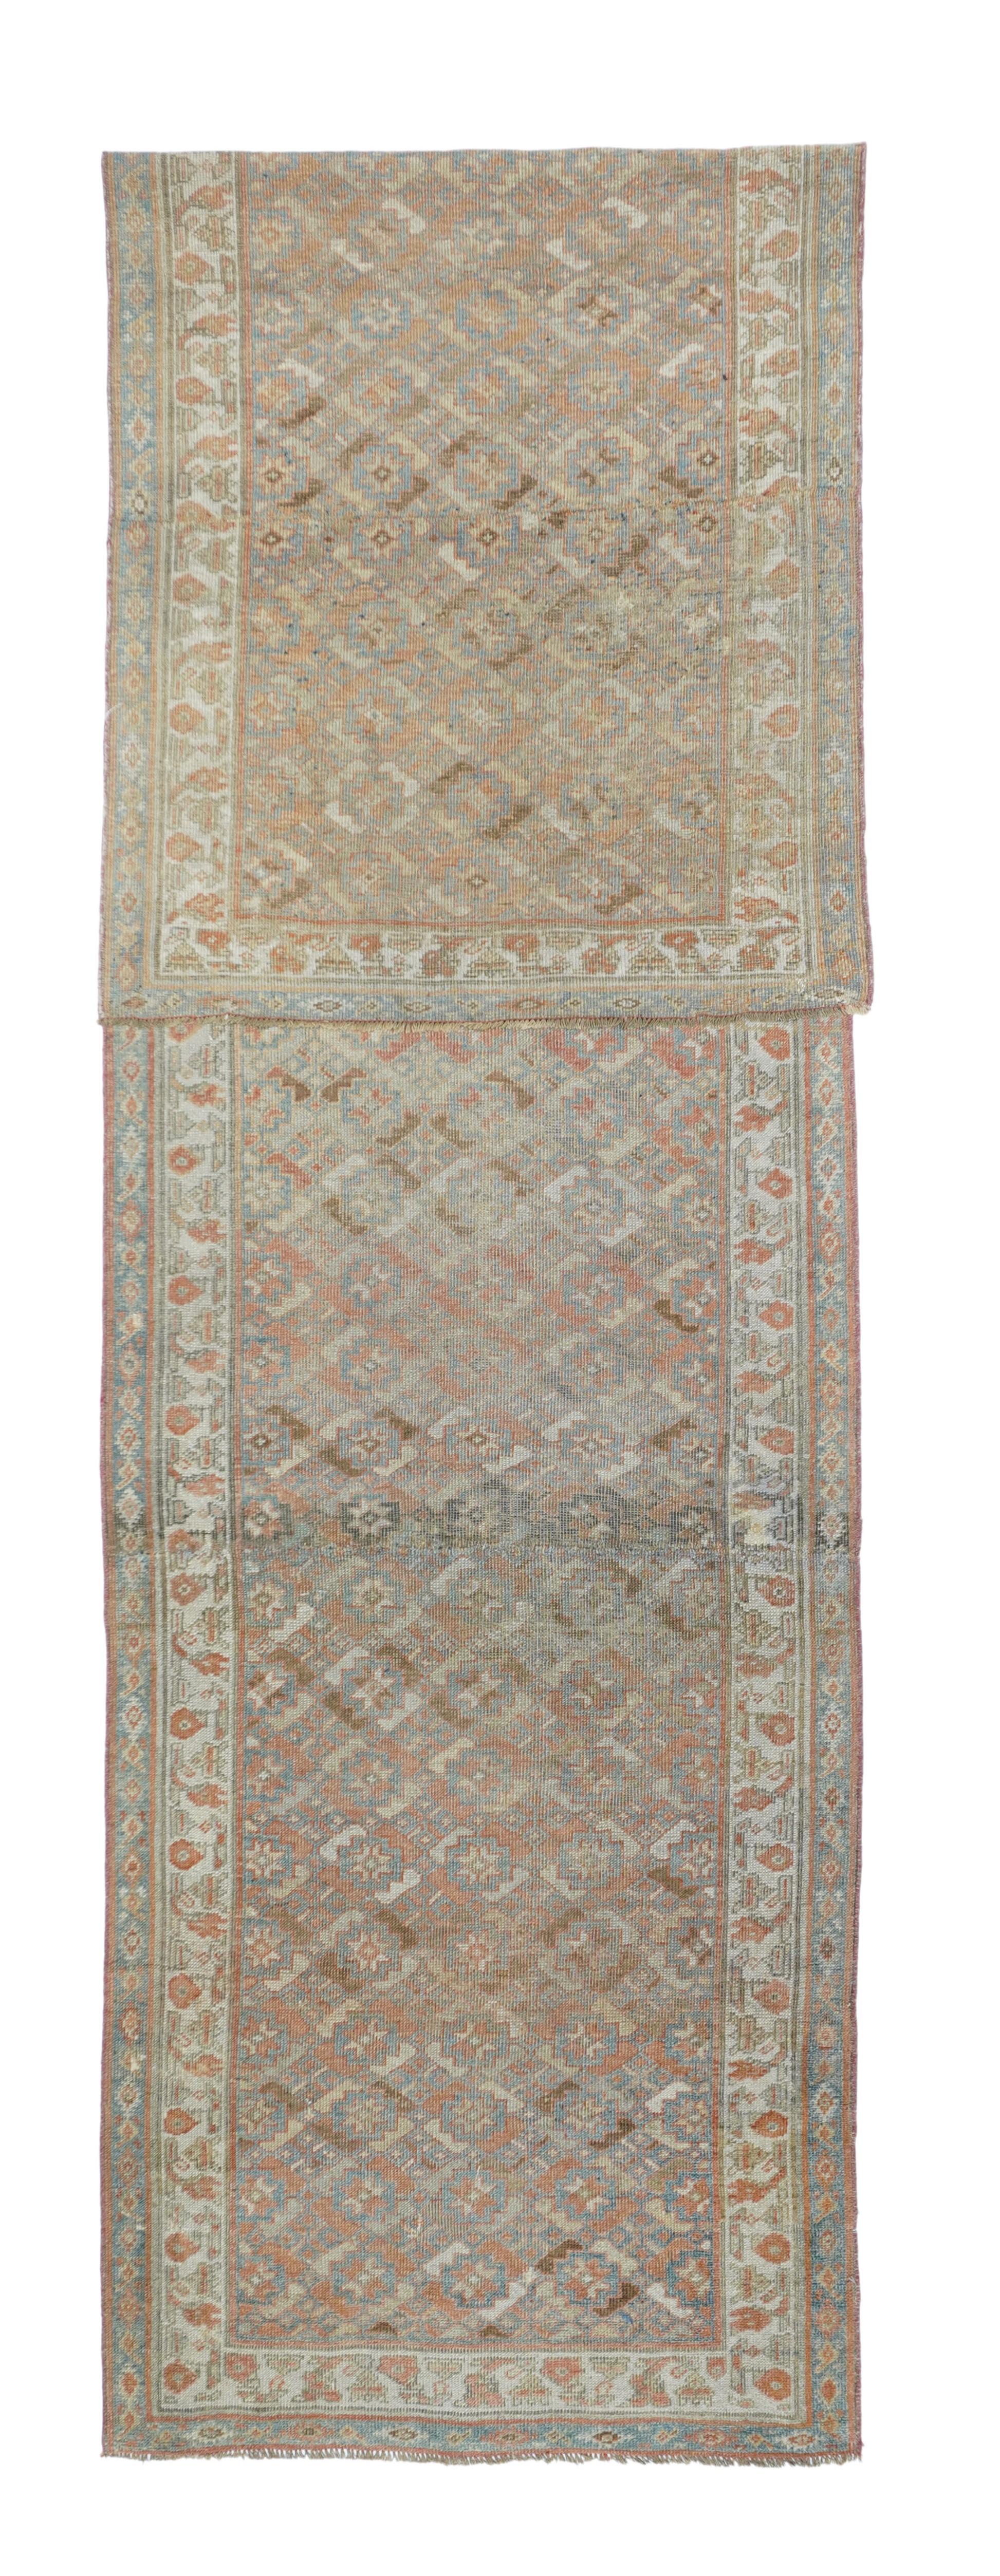 Antique Bidjar runner. An allover repeat of stars and four-flower lozenges forms a lattice pattern on the cream field. Pale blue and rust accents, Cream border with stylized flowers. Wool foundation, moderate weave. General, even wear. Fairly good